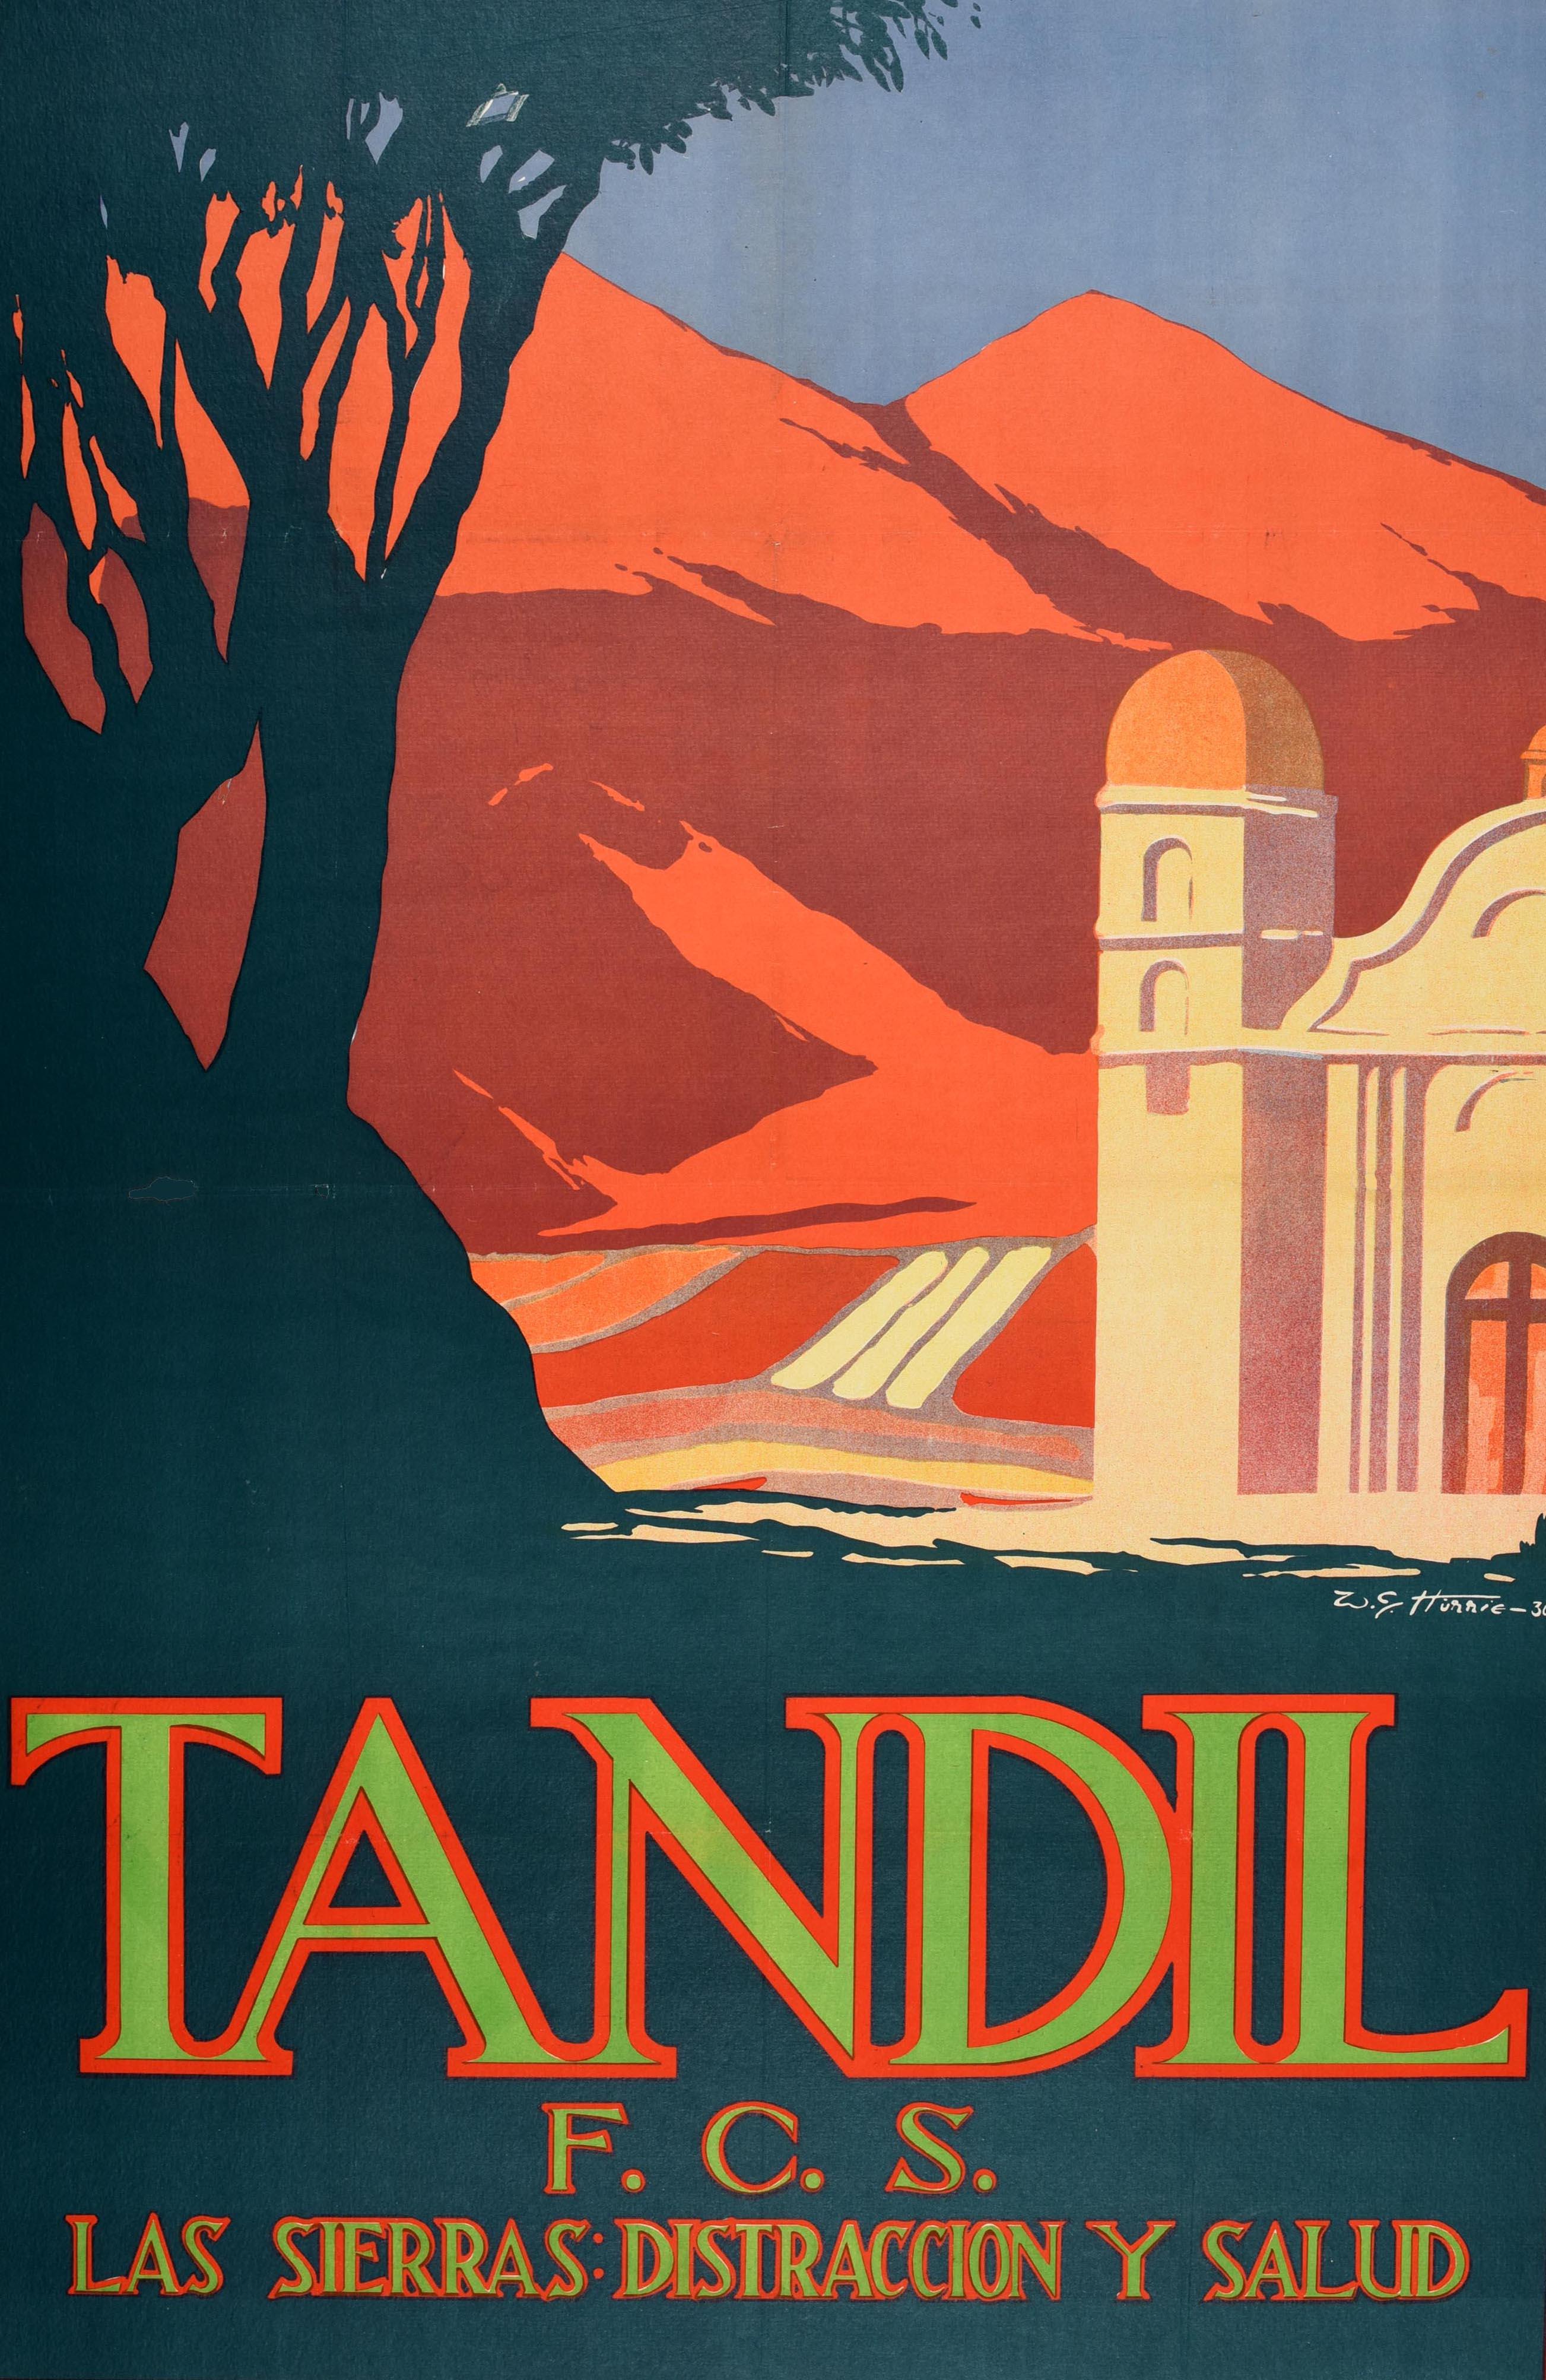 Original vintage train travel poster for Tandil F.C.S. Las Sierras Distraccion y Salud / The Mountains Relaxation and Health featuring a scenic Art Deco view of the edge of a building in front of hills glowing red with shadows in the light below the